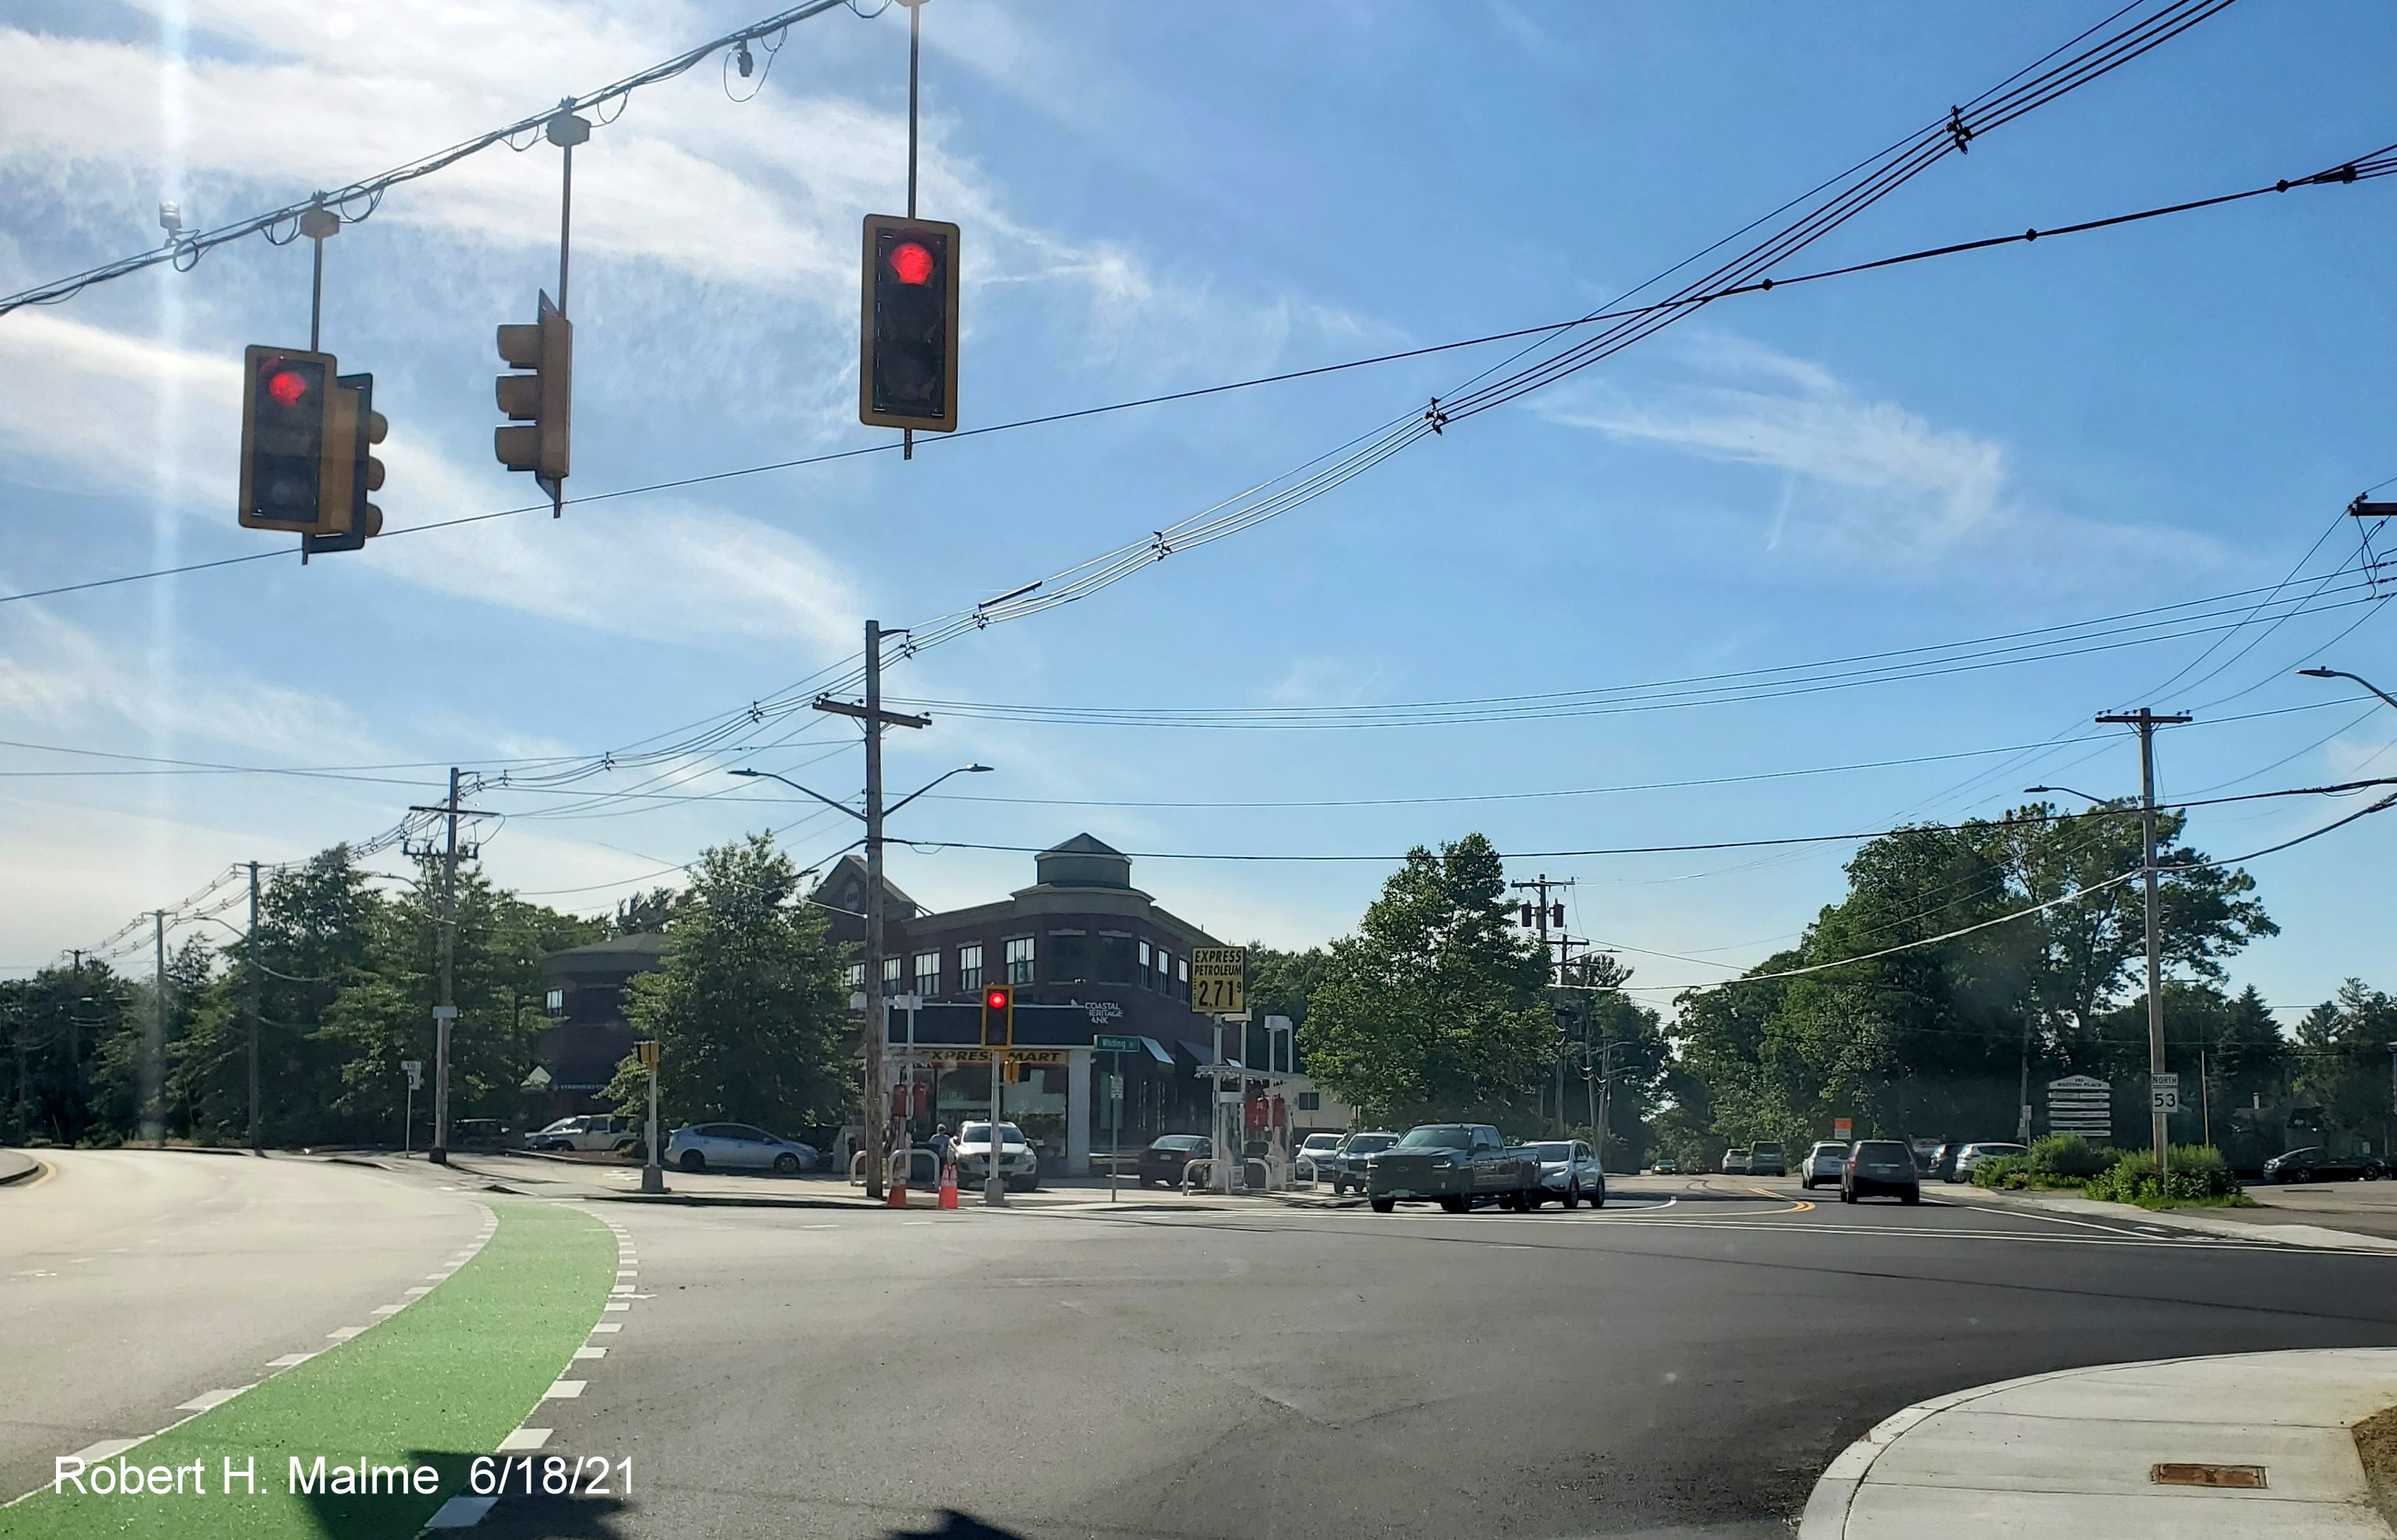 Image of completed renovation of Whiting Street (MA 53) intersection with Derby and Gardner Streets in Hingham including new traffic signals, a painted bicyle lane and new North MA 53 reassurance marker, June 2021